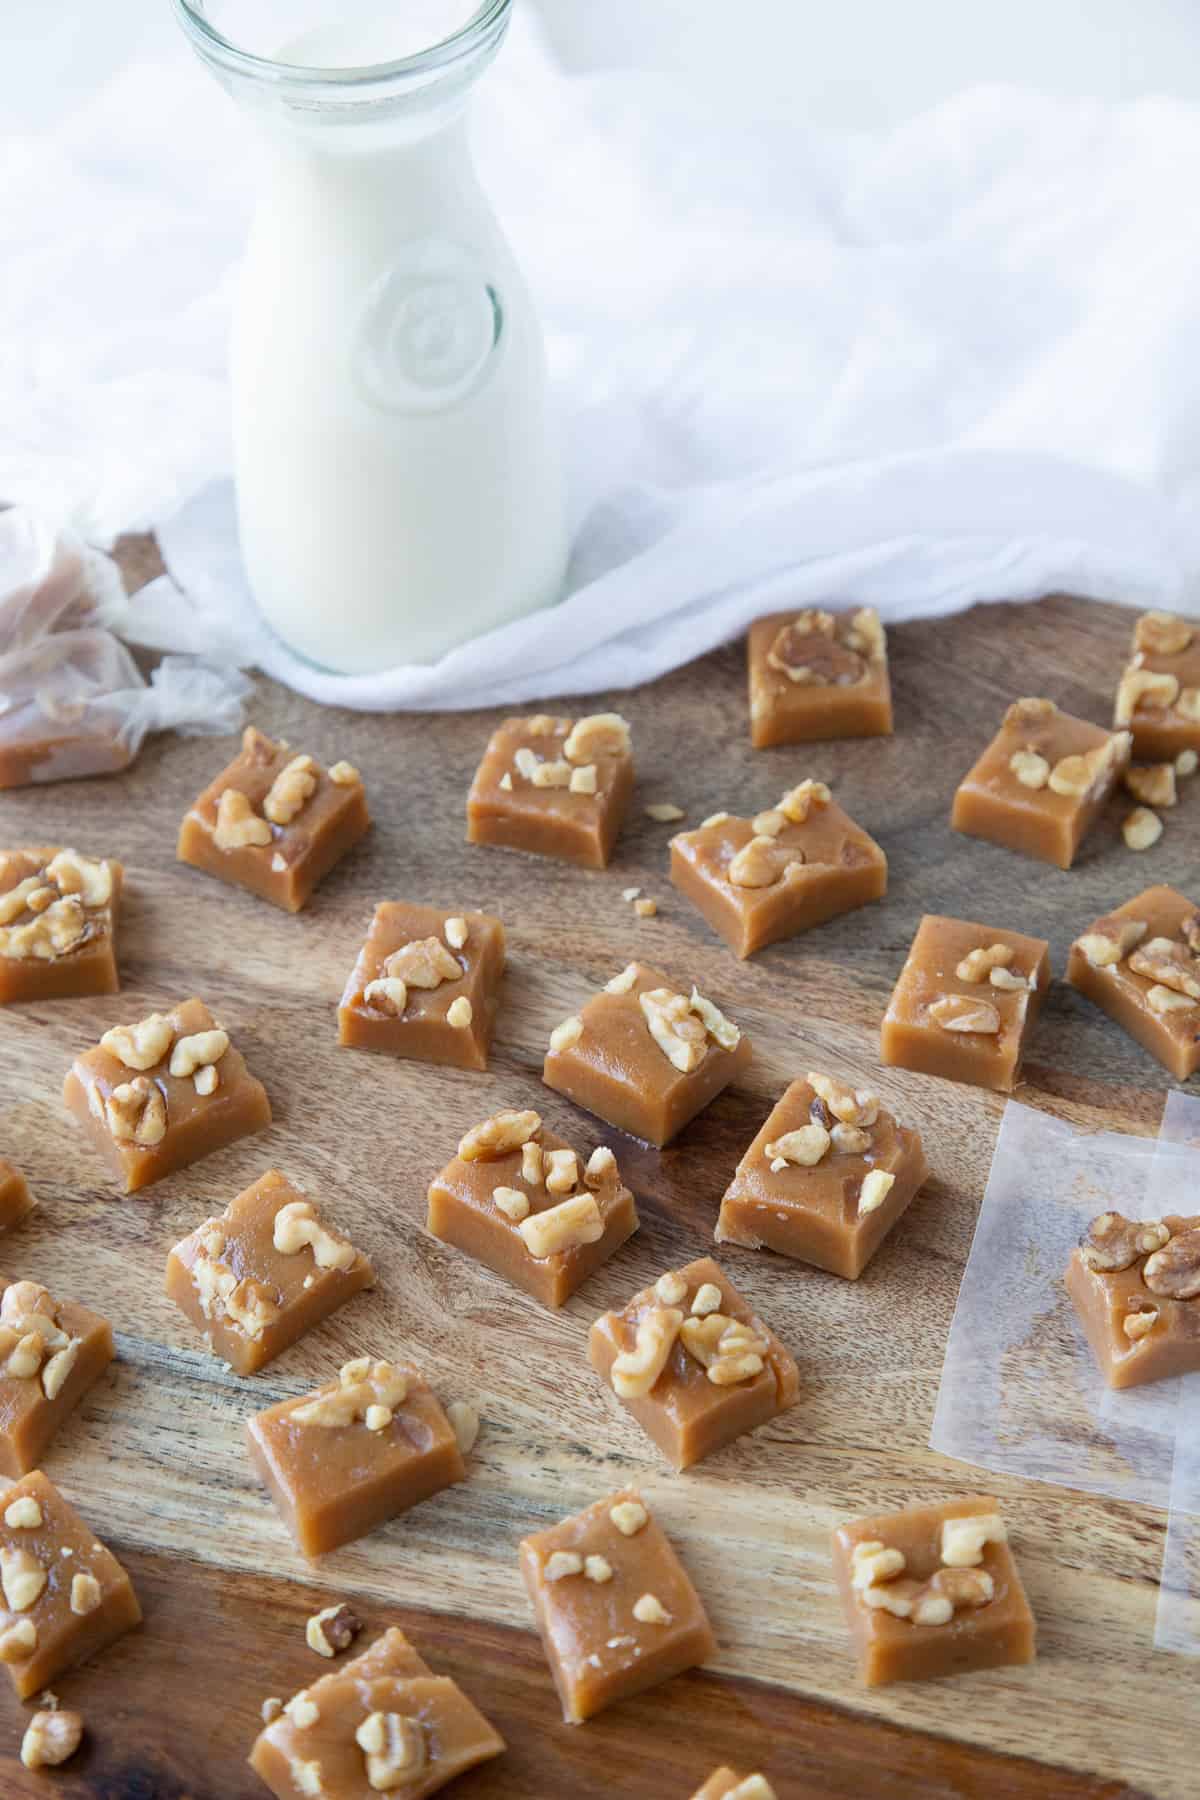 walnut caramels on a wooden board with a glass jug of milk nearby.